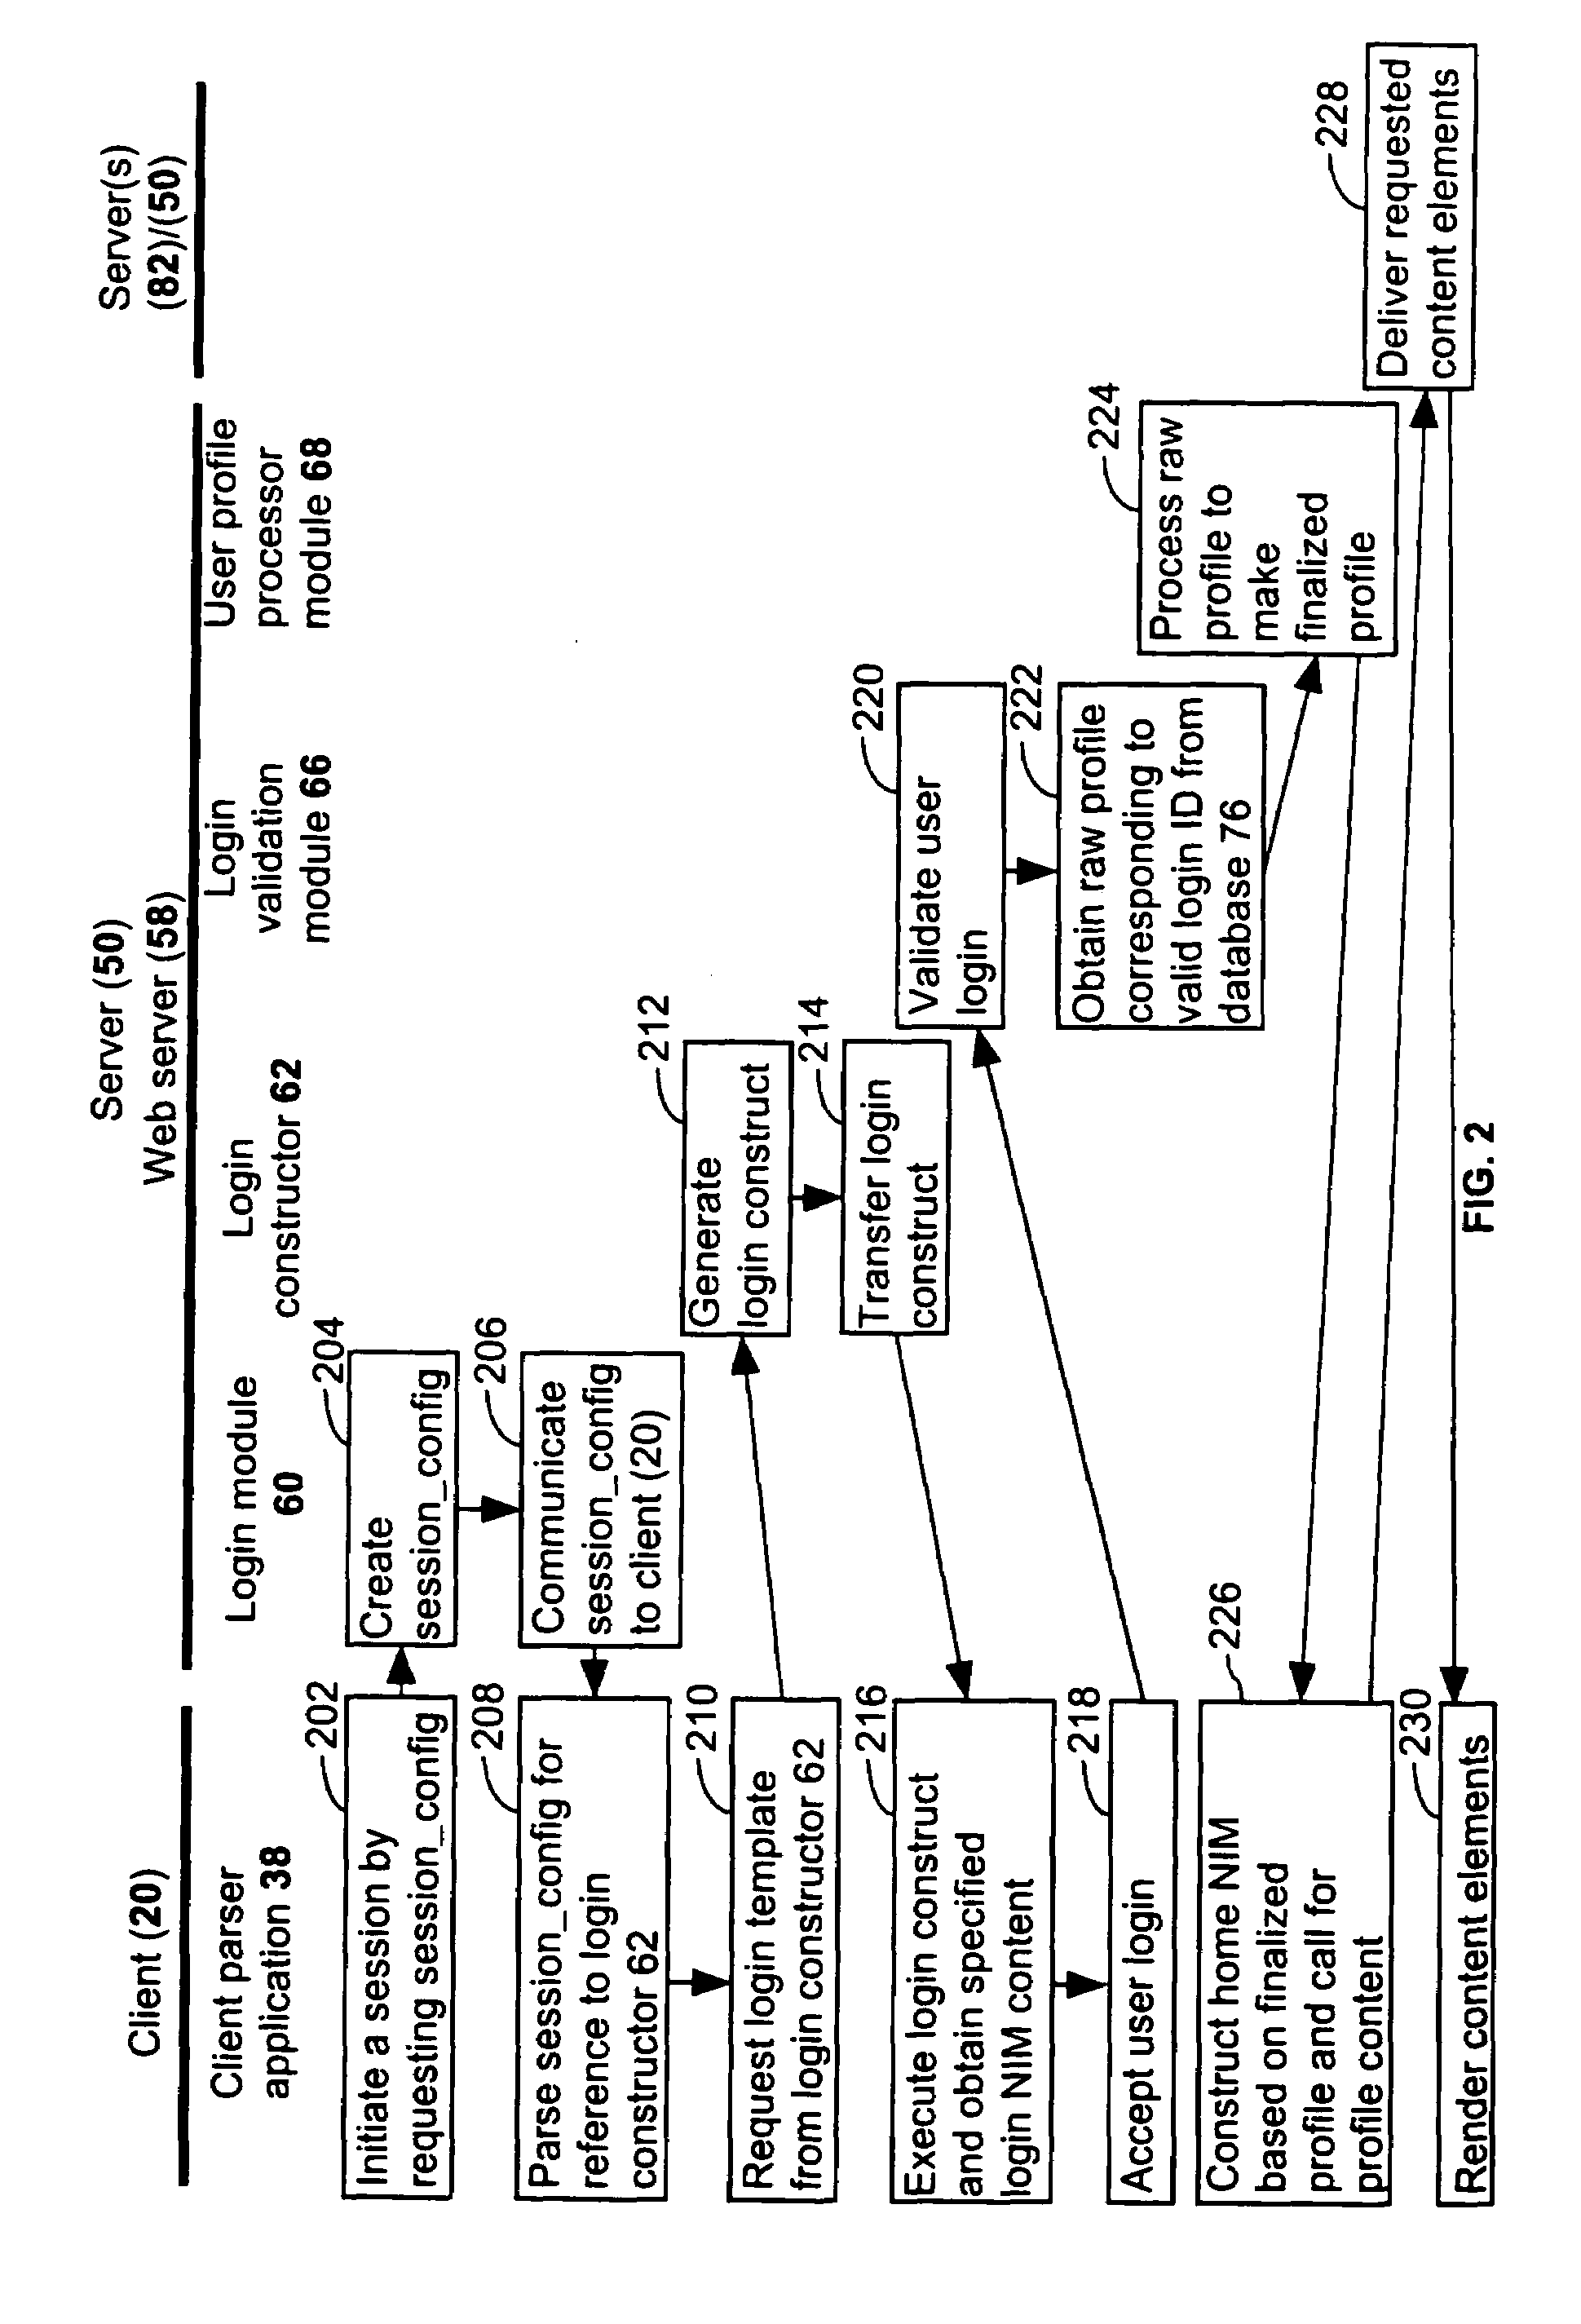 Apparatus and method for tracing the distribution of diversely sourced internet content